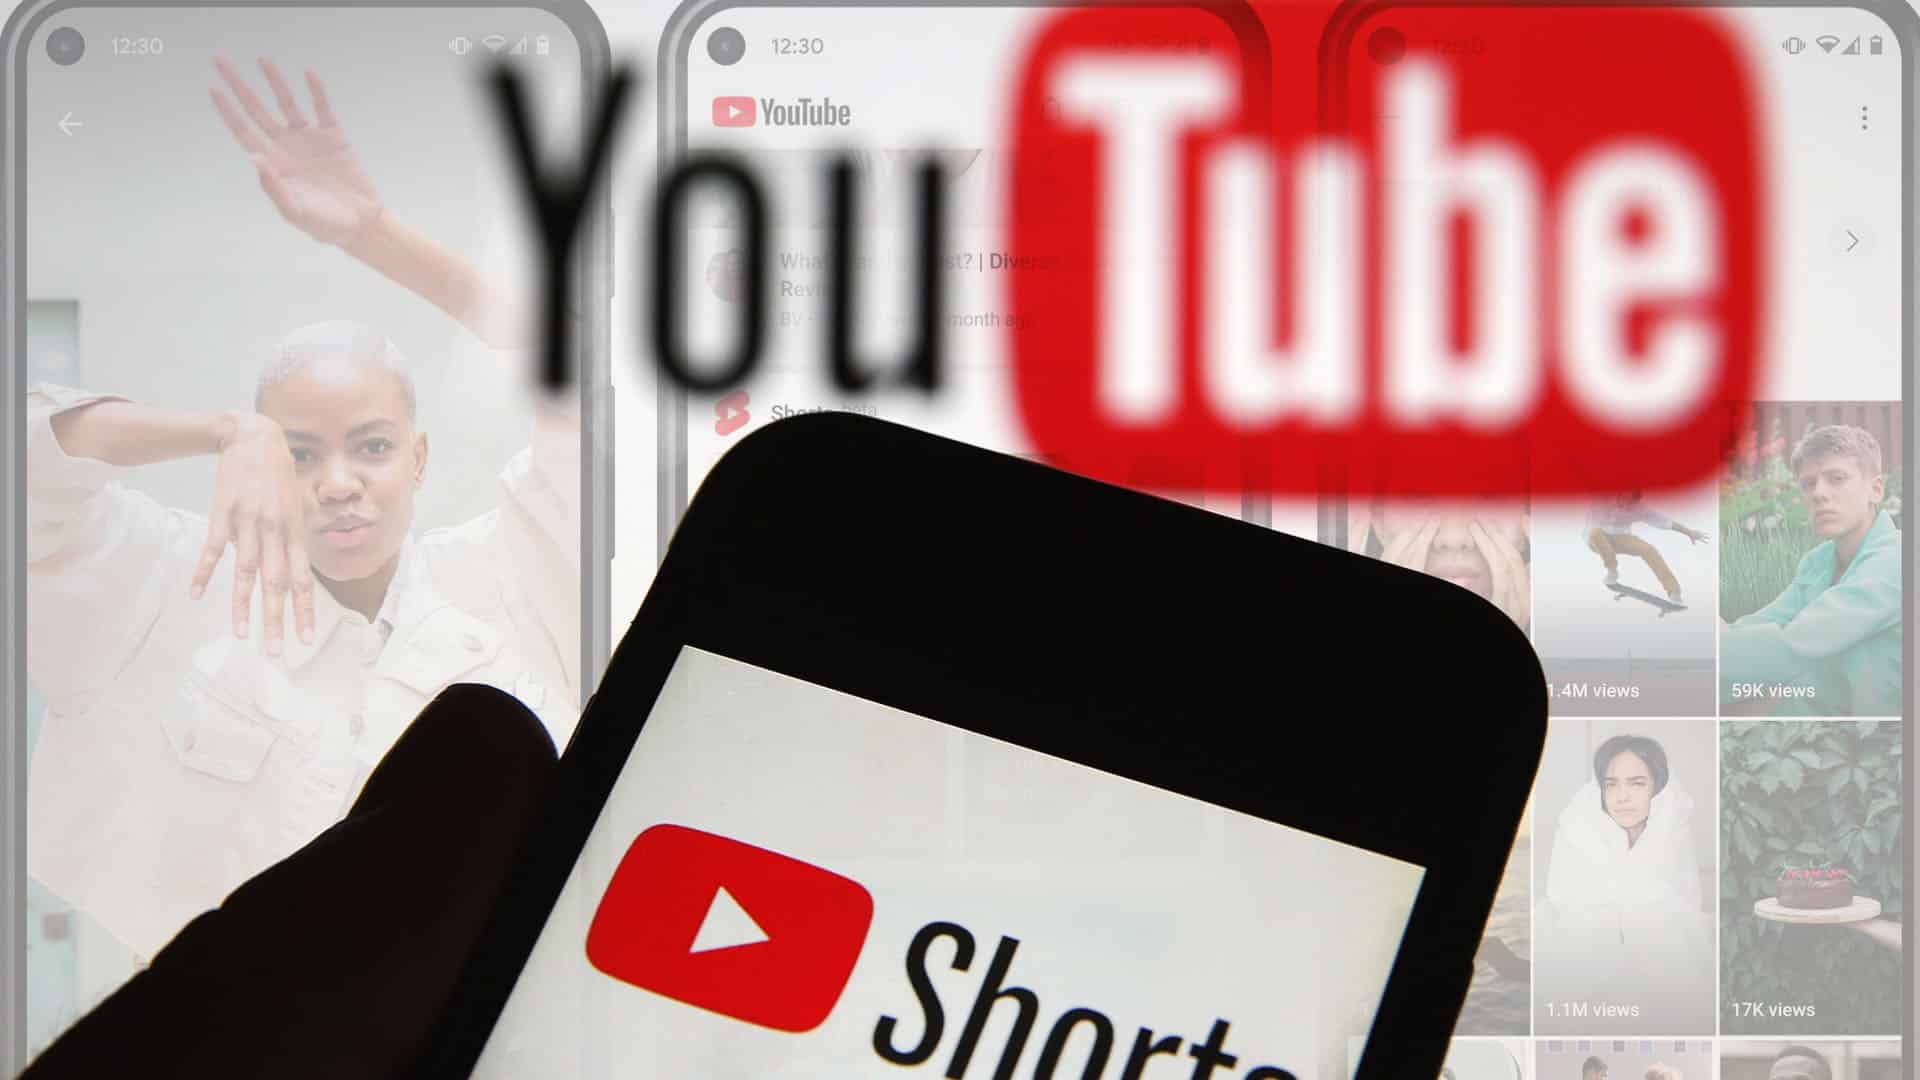 YouTube Shorts, short-version video sharing platform of YouTube, has crossed 2 billion views by logged-in users monthly,